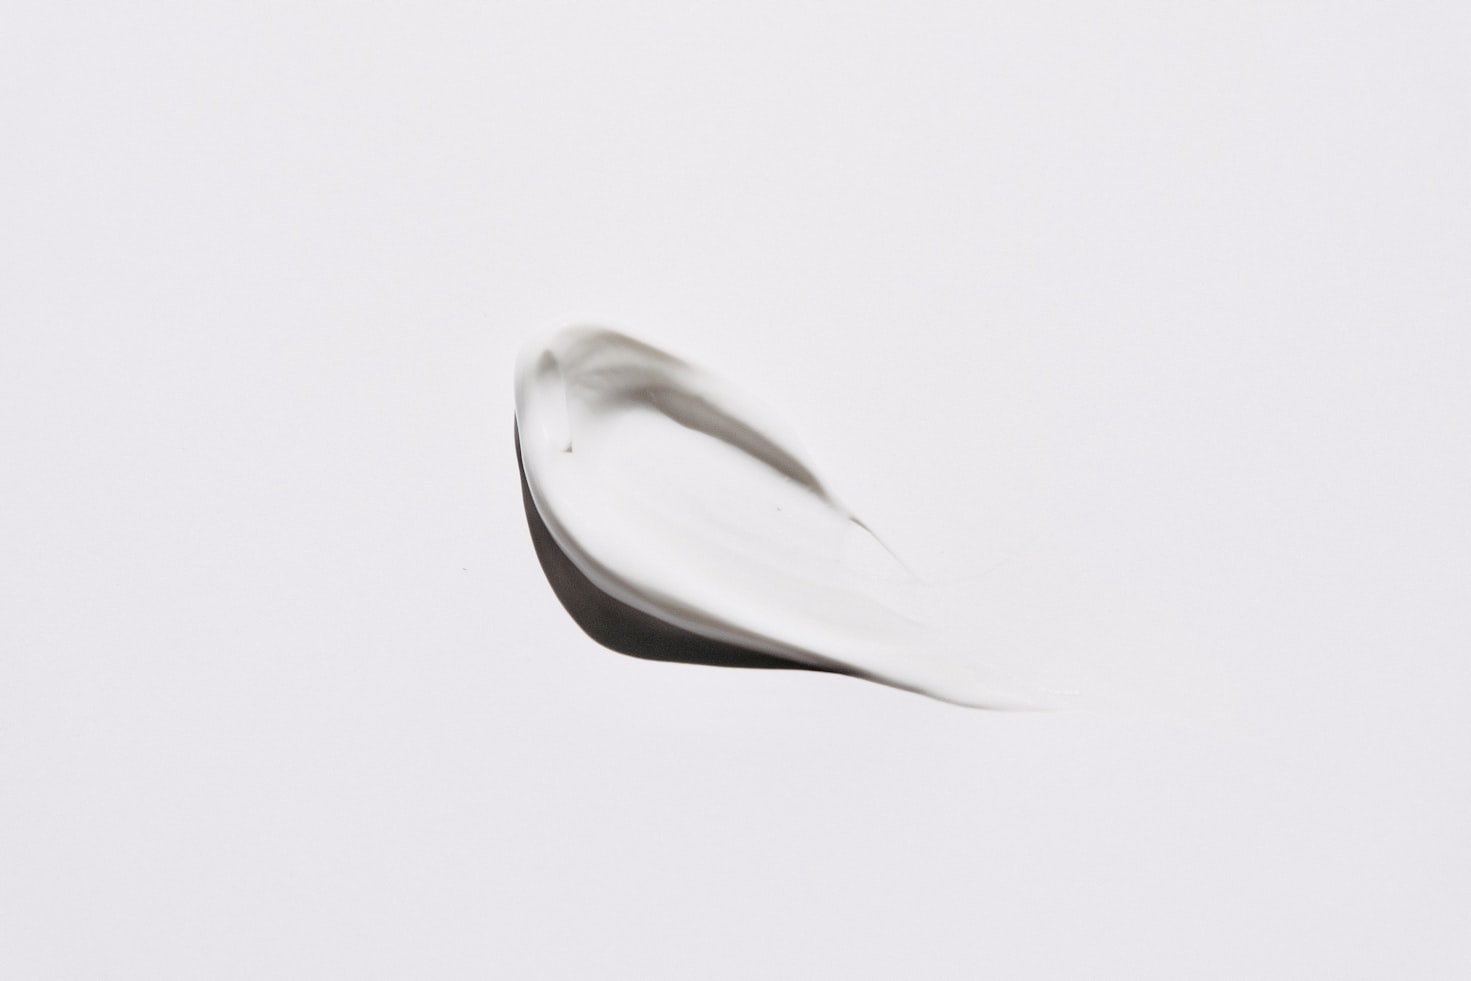 A drop of moisturizer spread out on a white background.